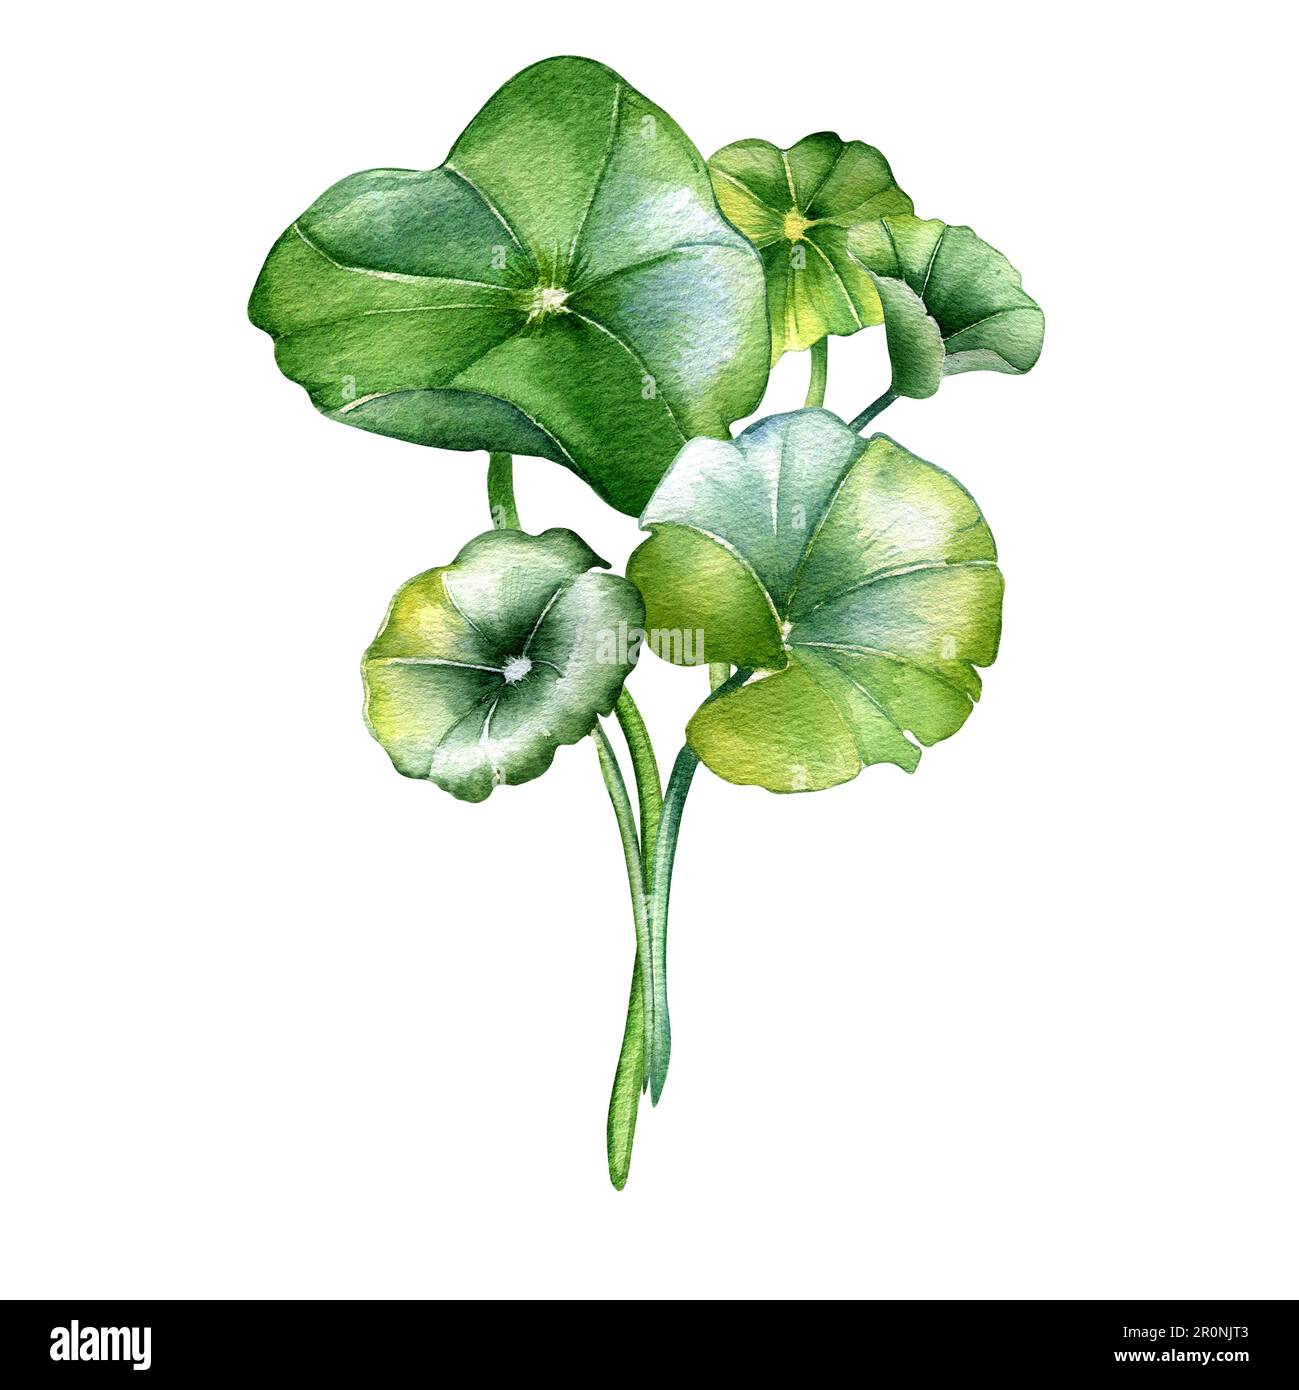 Centella asiatica composition watercolor illustration isolated on white. Pennywort, gotu kola herbal plants, cola hand drawn. Design element for packa Stock Photo